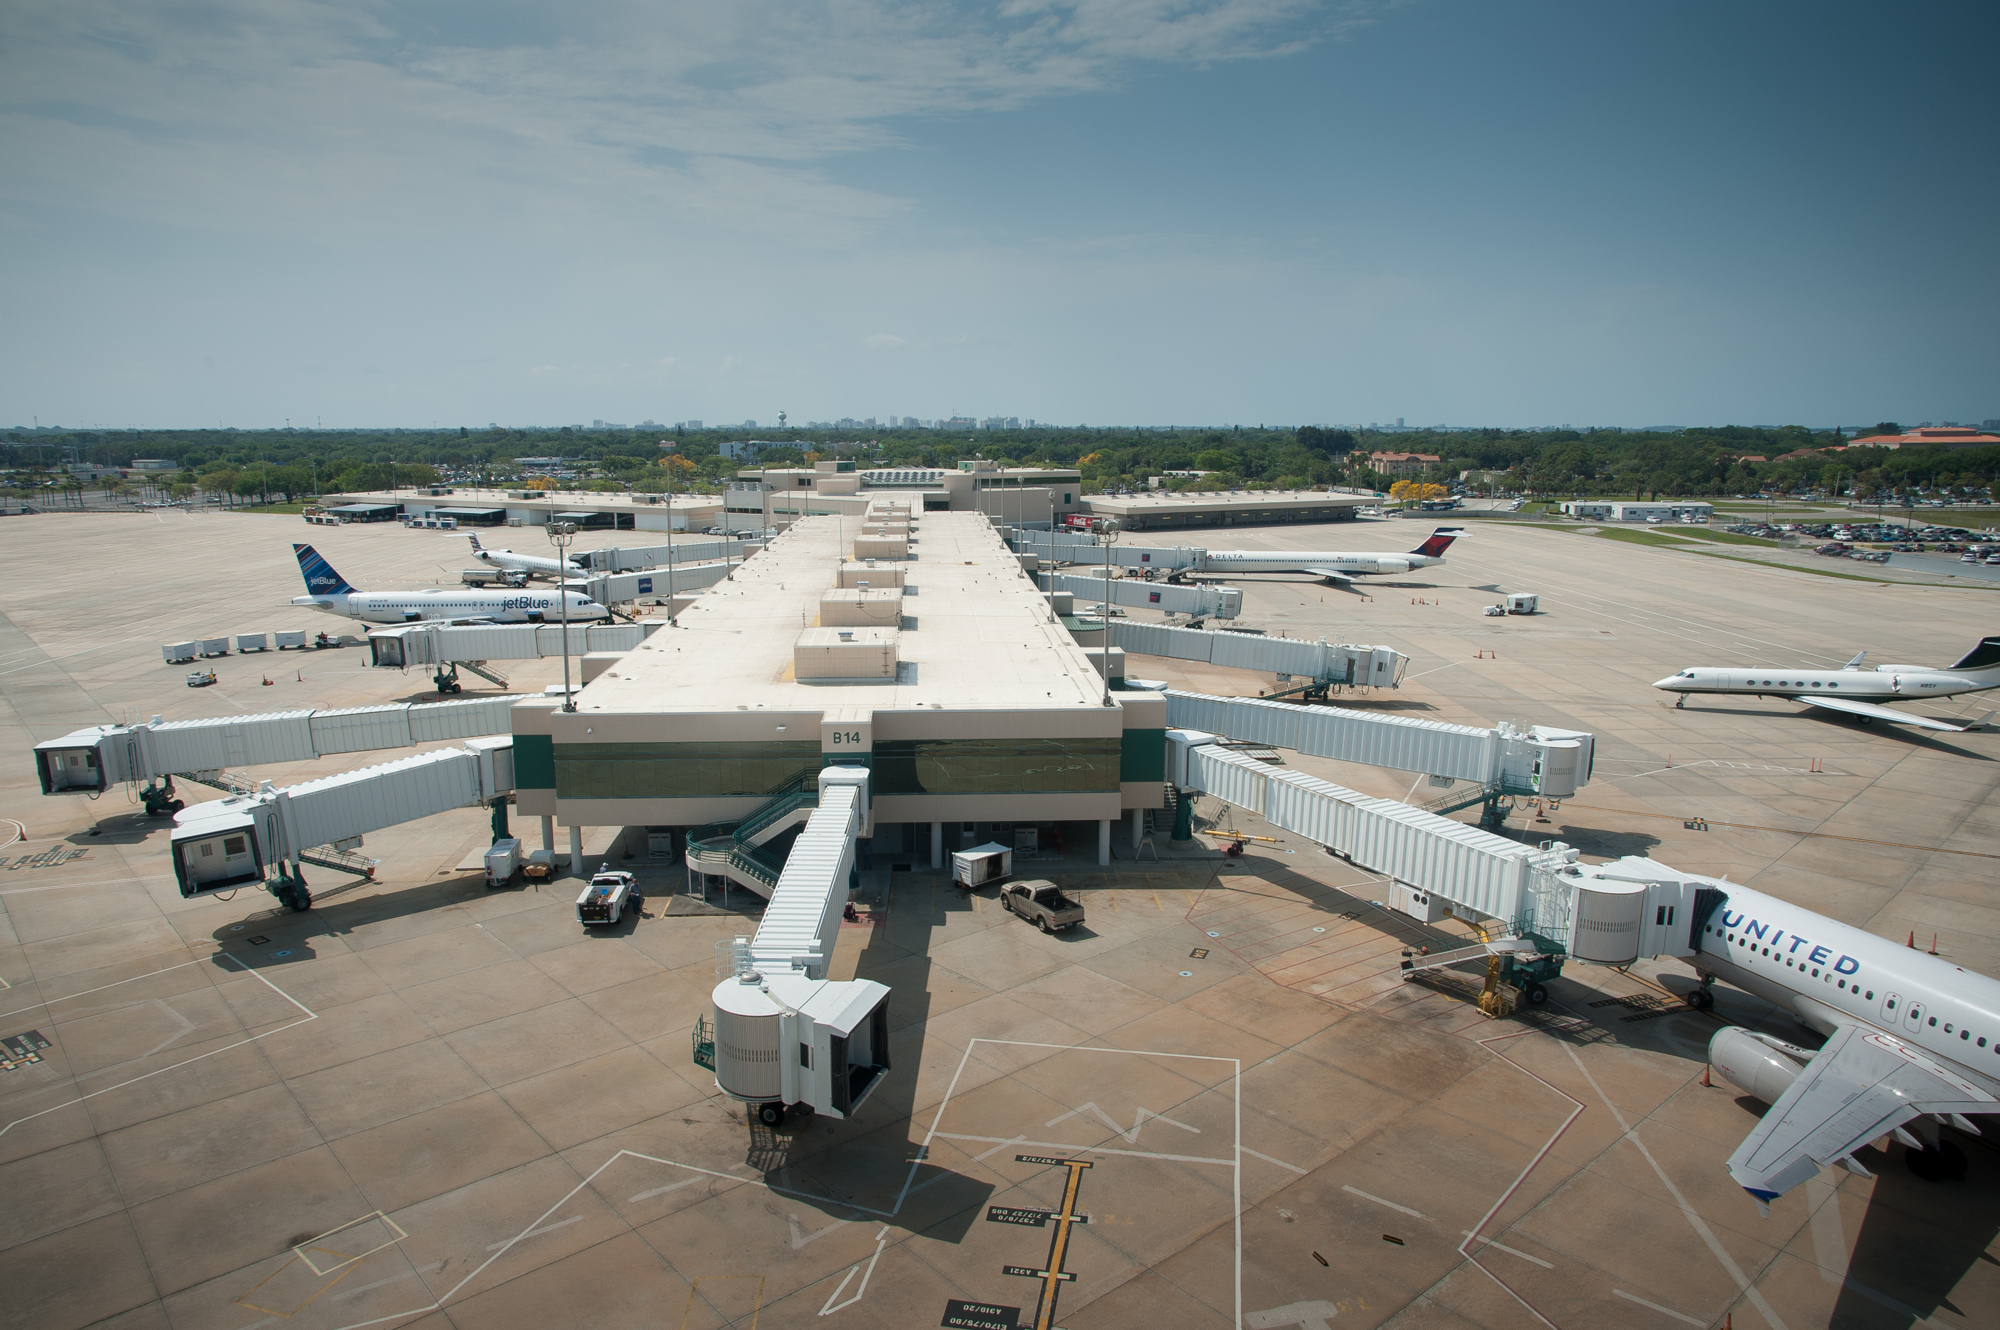 By planning around large hubs of activity, the MPO hopes to both improve transportation and the economic health of the region. Photo courtesy Sarasota-Bradenton International Airport.